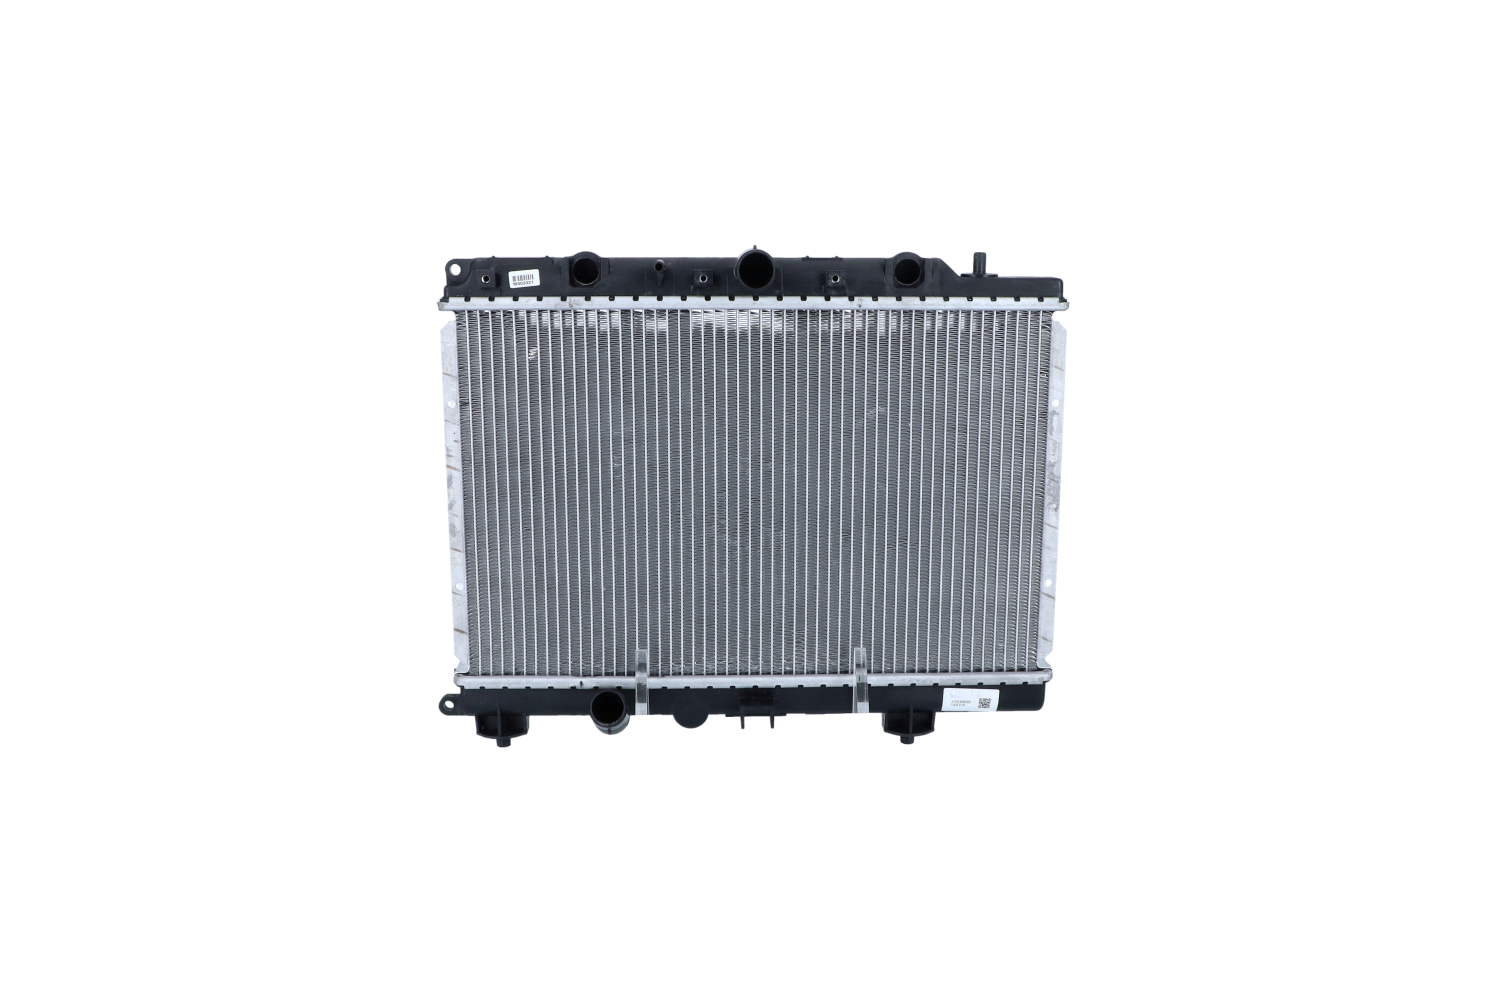 NRF EASY FIT 55307 Engine radiator Aluminium, 498 x 320 x 32 mm, with mounting parts, Brazed cooling fins